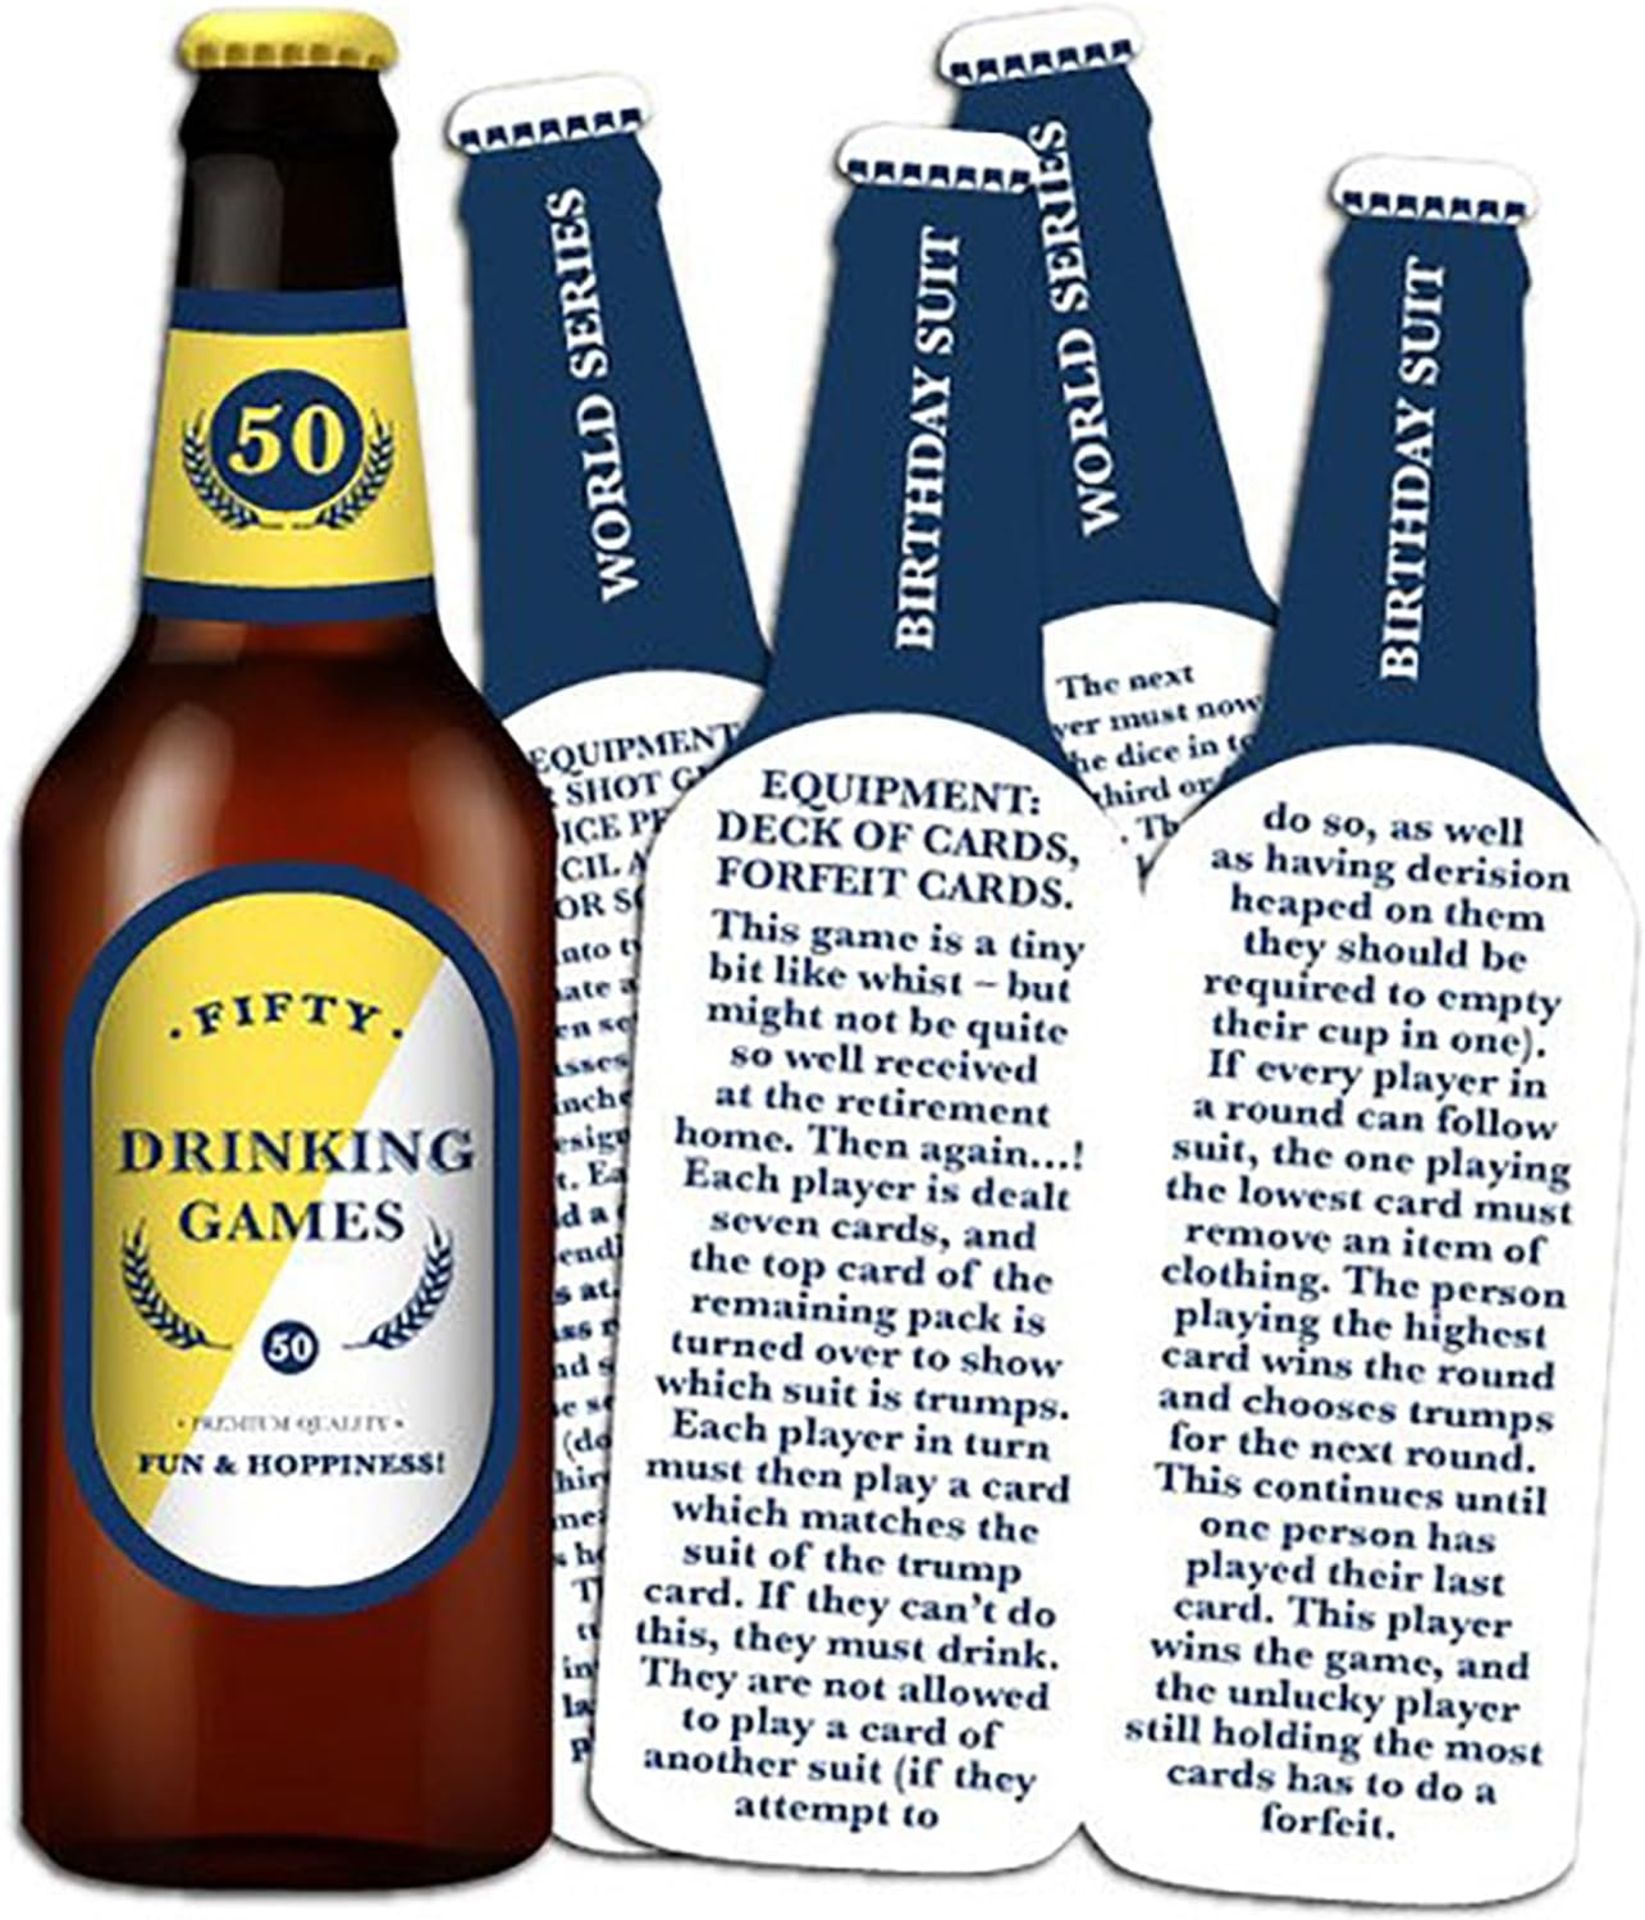 50X NEW FIFTY DRINKING GAMES - Image 2 of 4